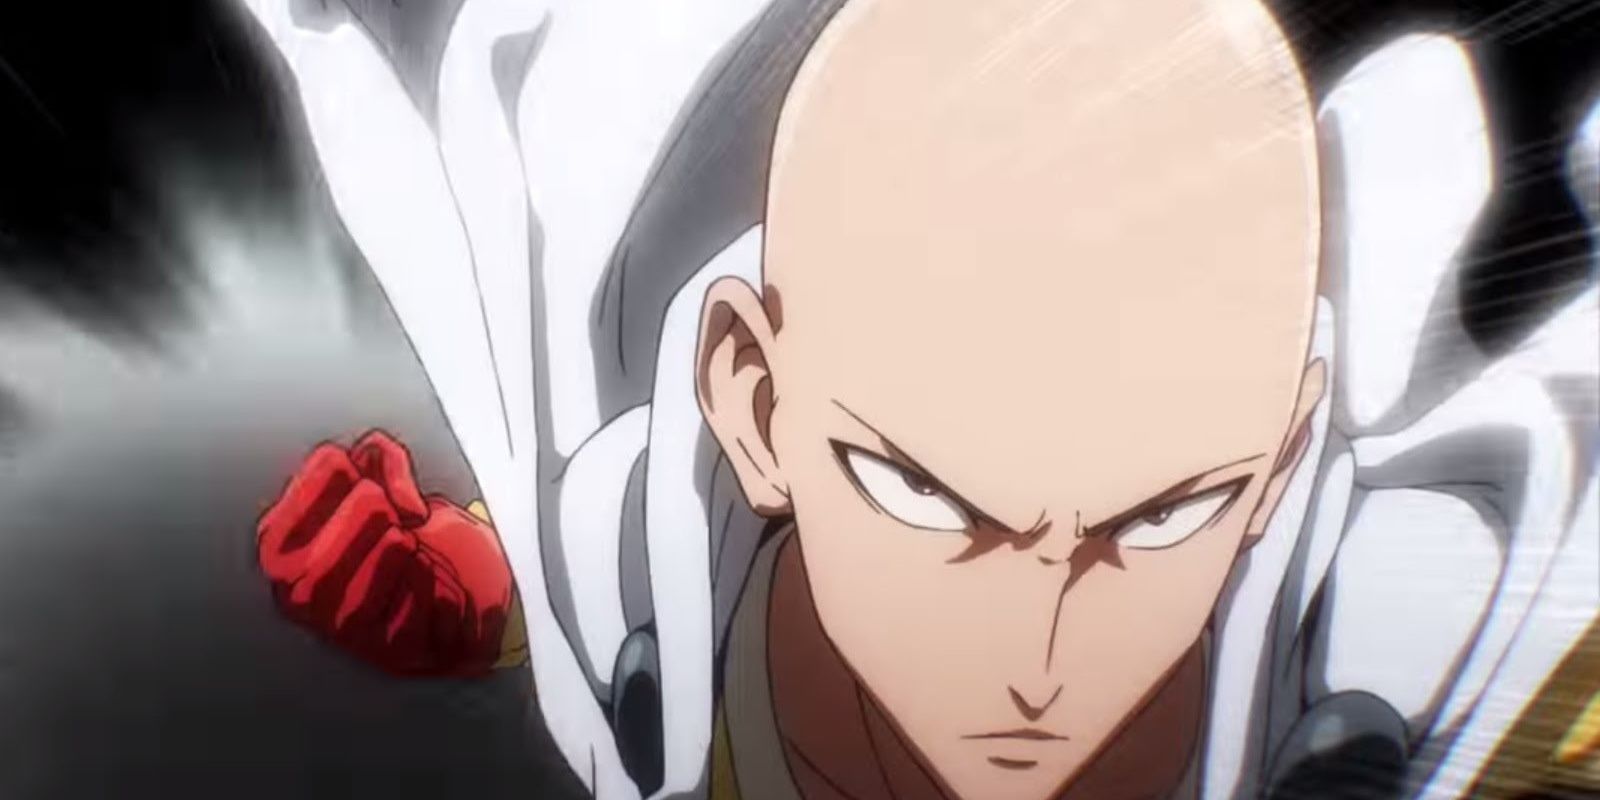 10. "Saitama" from One Punch Man - wide 2